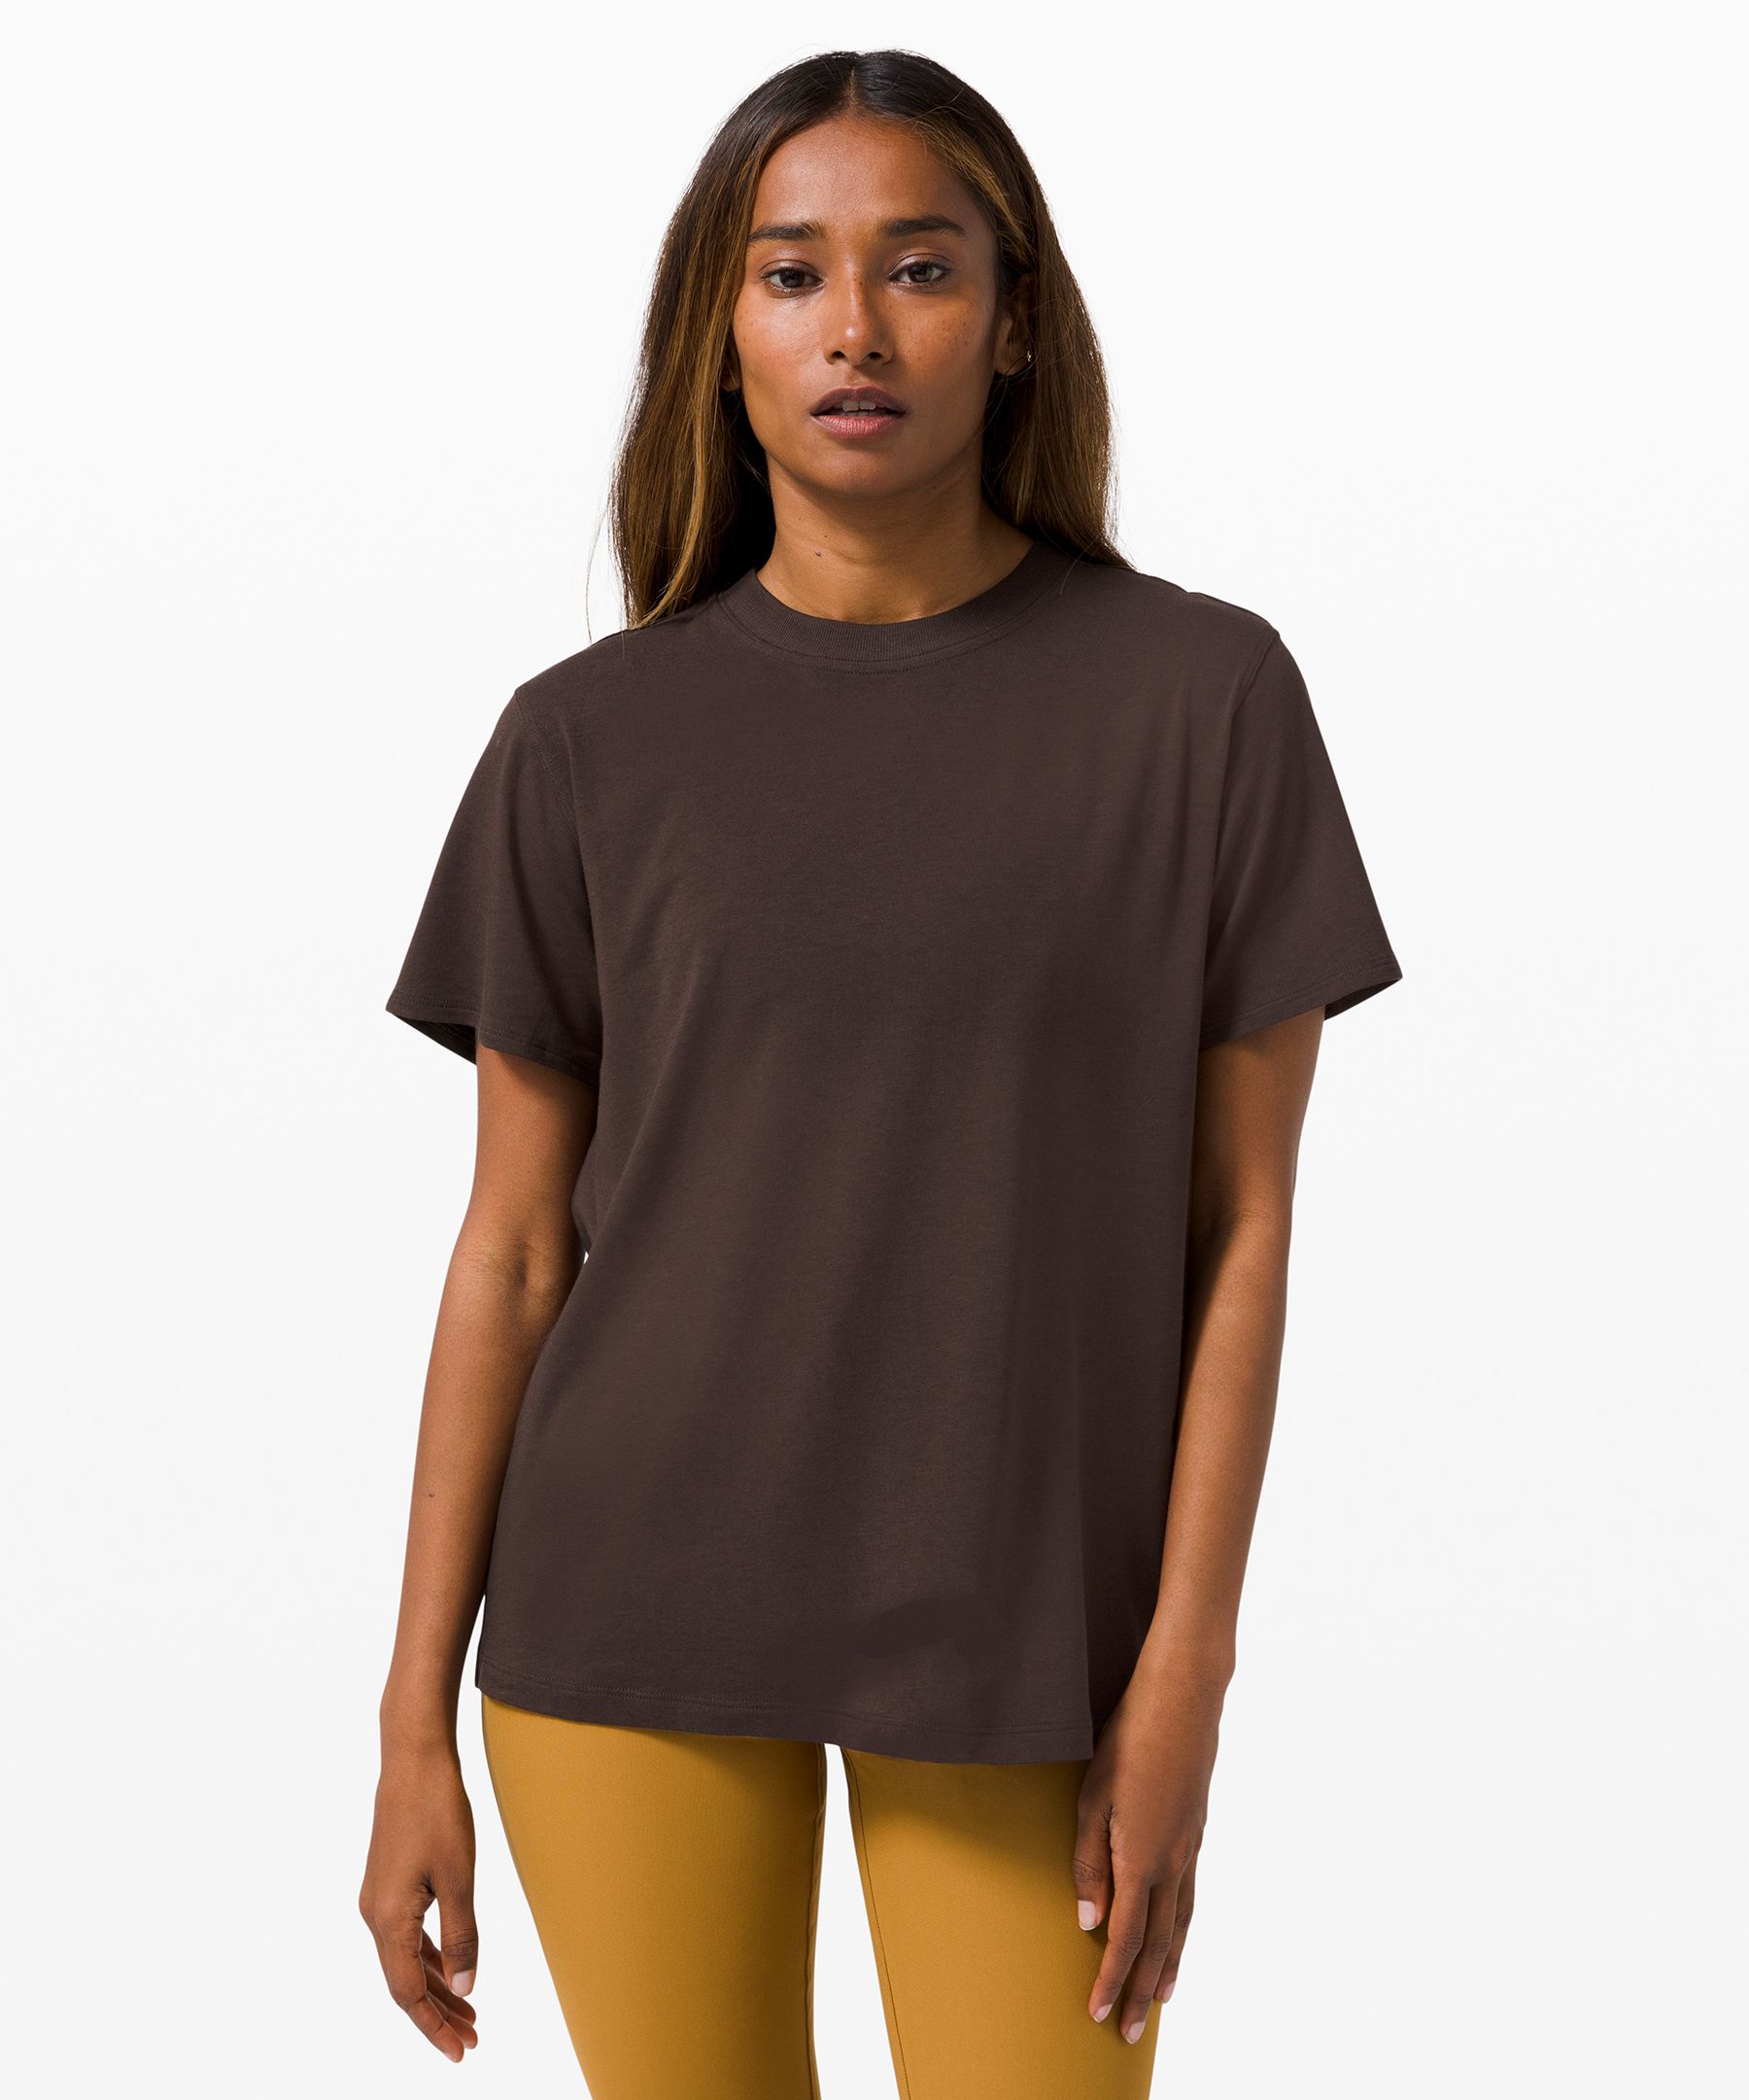 Lululemon All Yours Tee In Brown